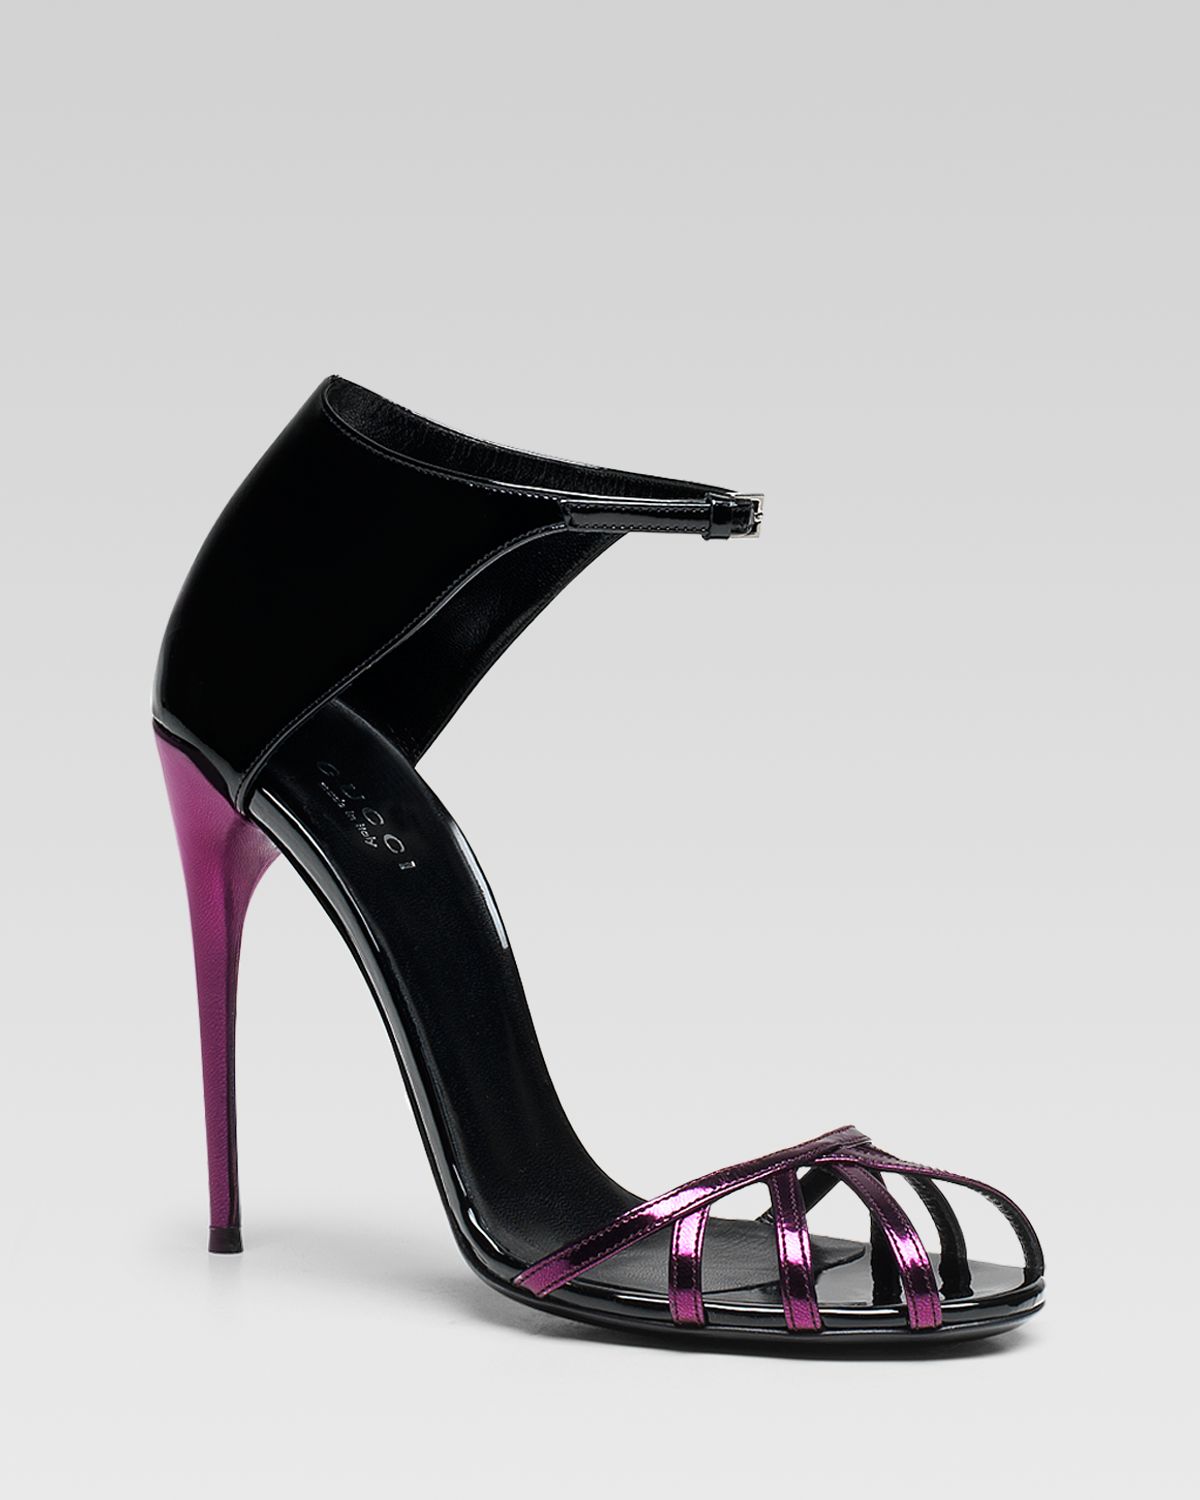 Gucci Margot Caged Toe Evening Sandal in Black | Lyst